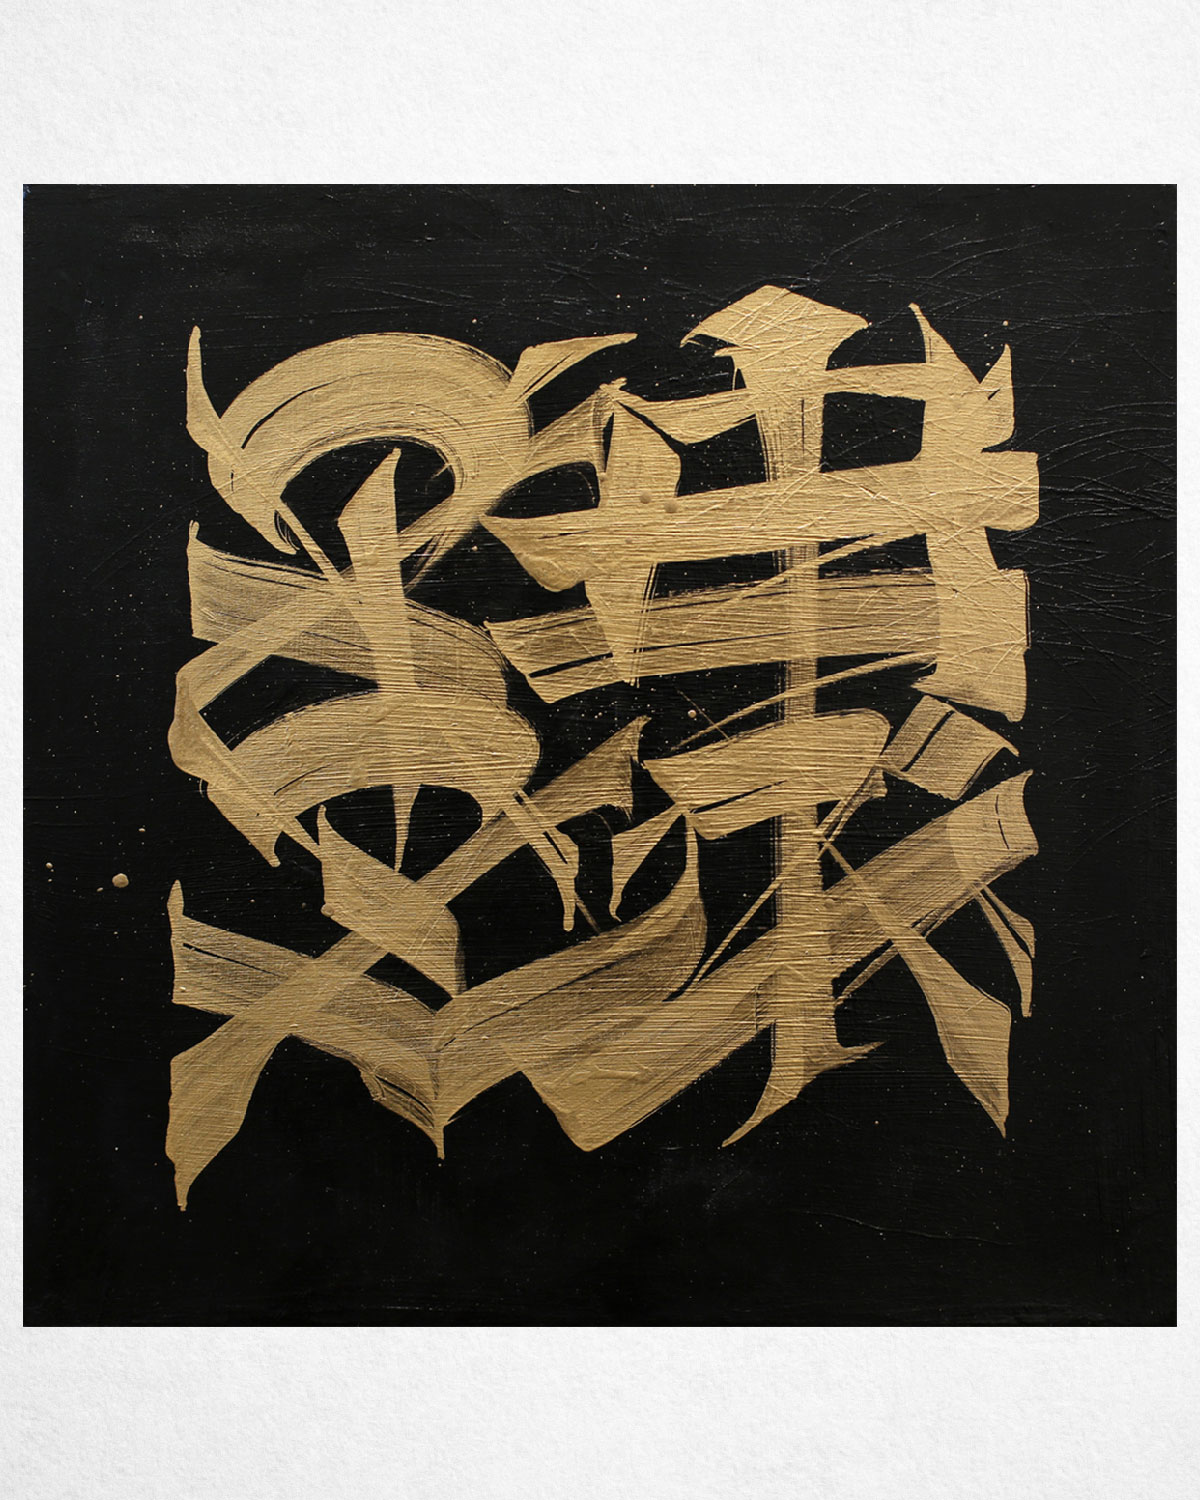 Painting Calligraphy by the artist Said-Dokins